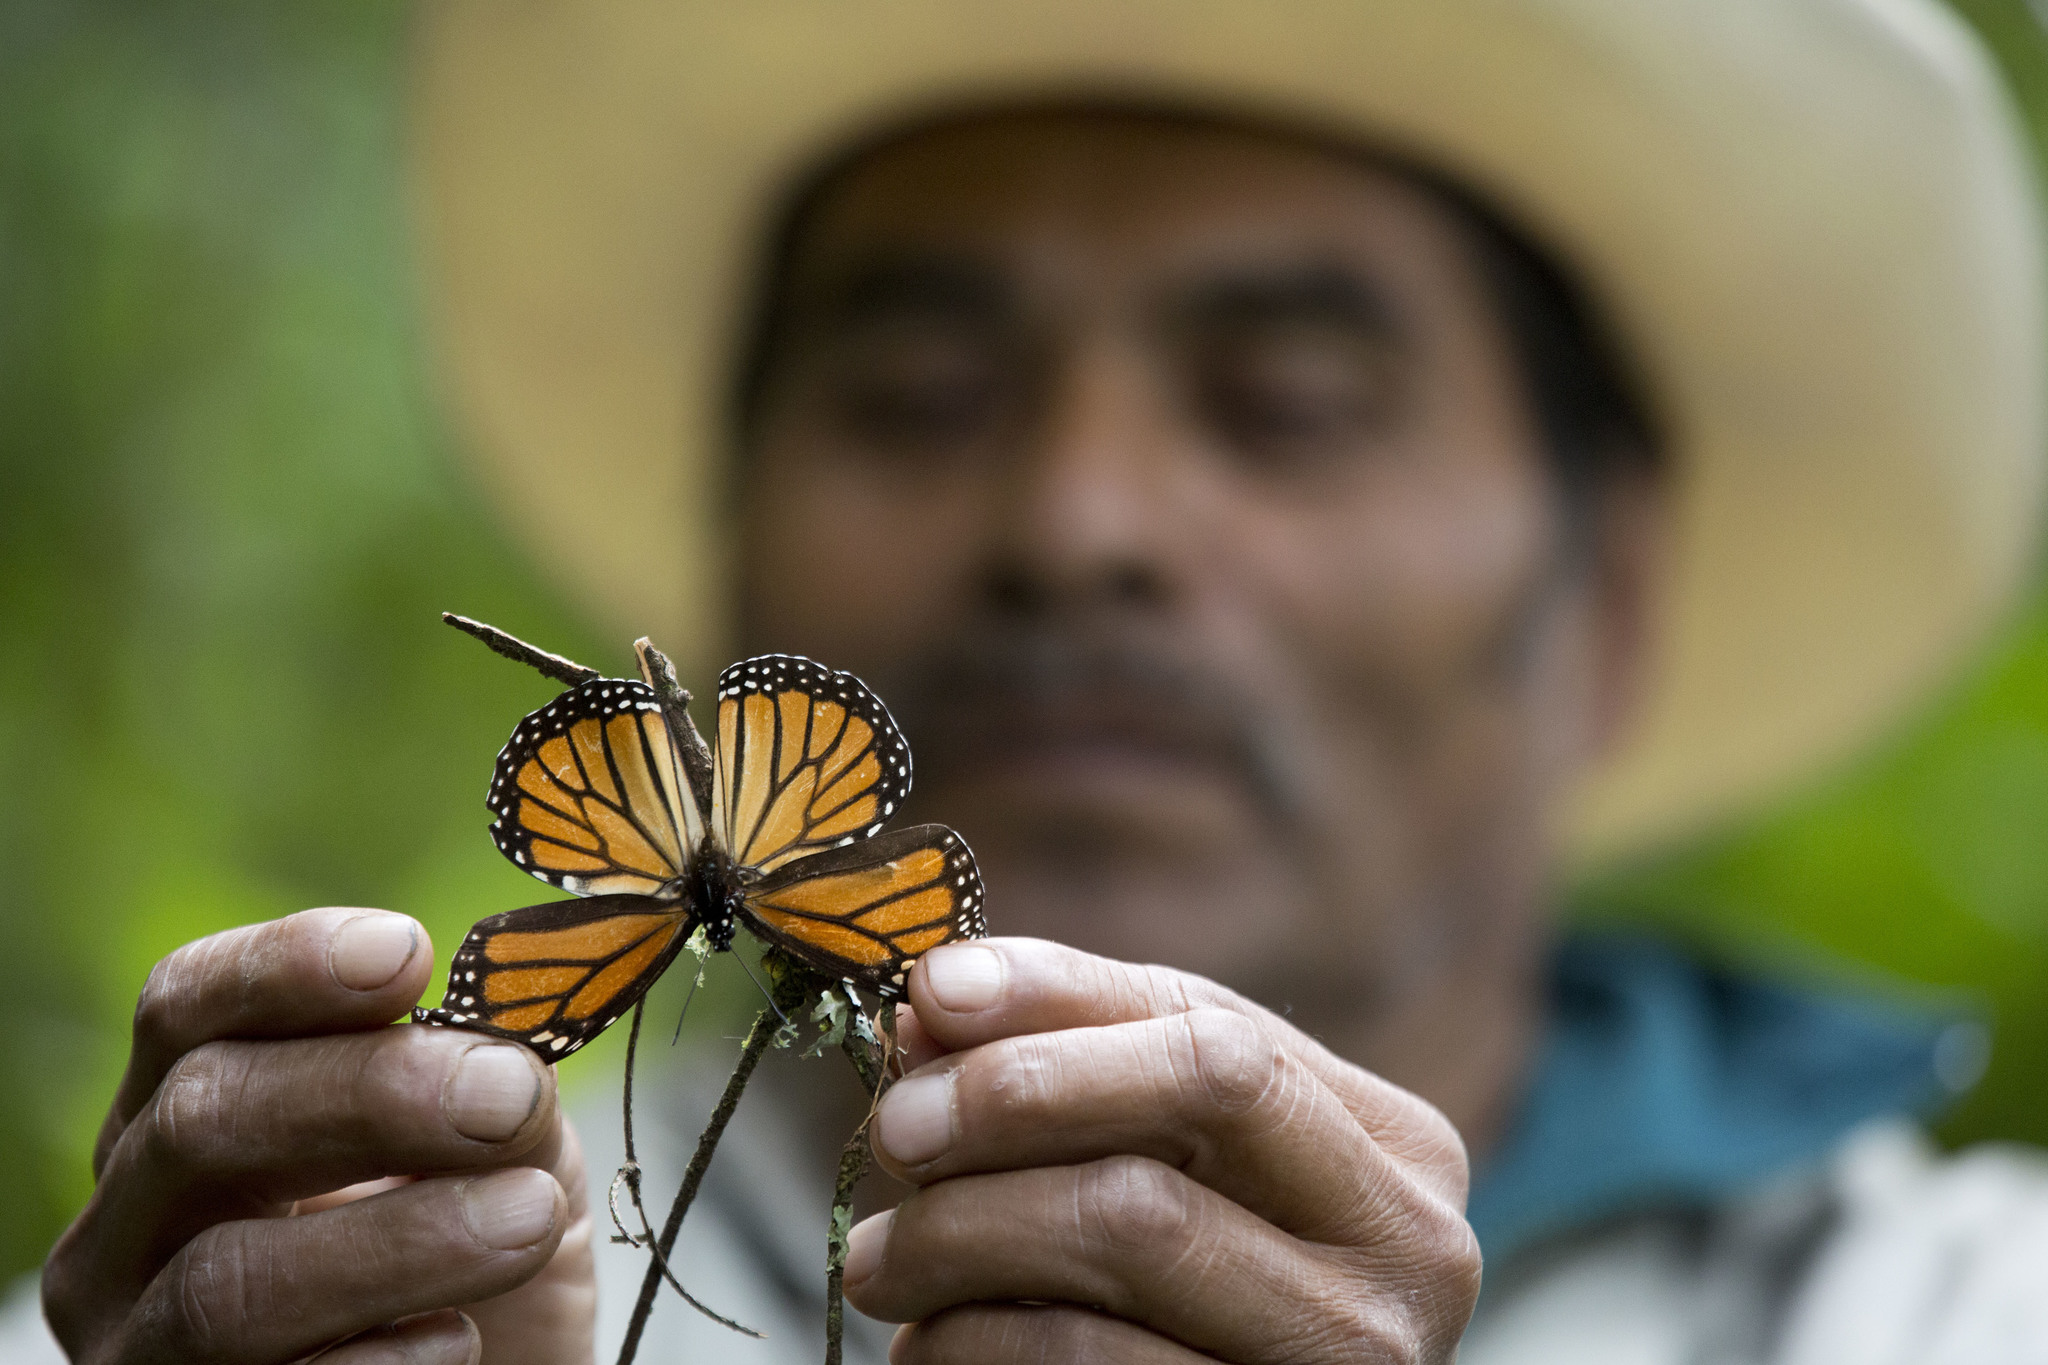 In this Nov. 12, 2015 photo, a guide holds up a damaged and dying butterfly at the monarch butterfly reserve in Piedra Herrada, Mexico. The number of monarch butterflies wintering in Mexico dropped by 27 percent this year, reversing last year’s recovery from historically low numbers, according to a study by government and independent experts released Thursday. (Rebecca Blackwell | The Associated Press)